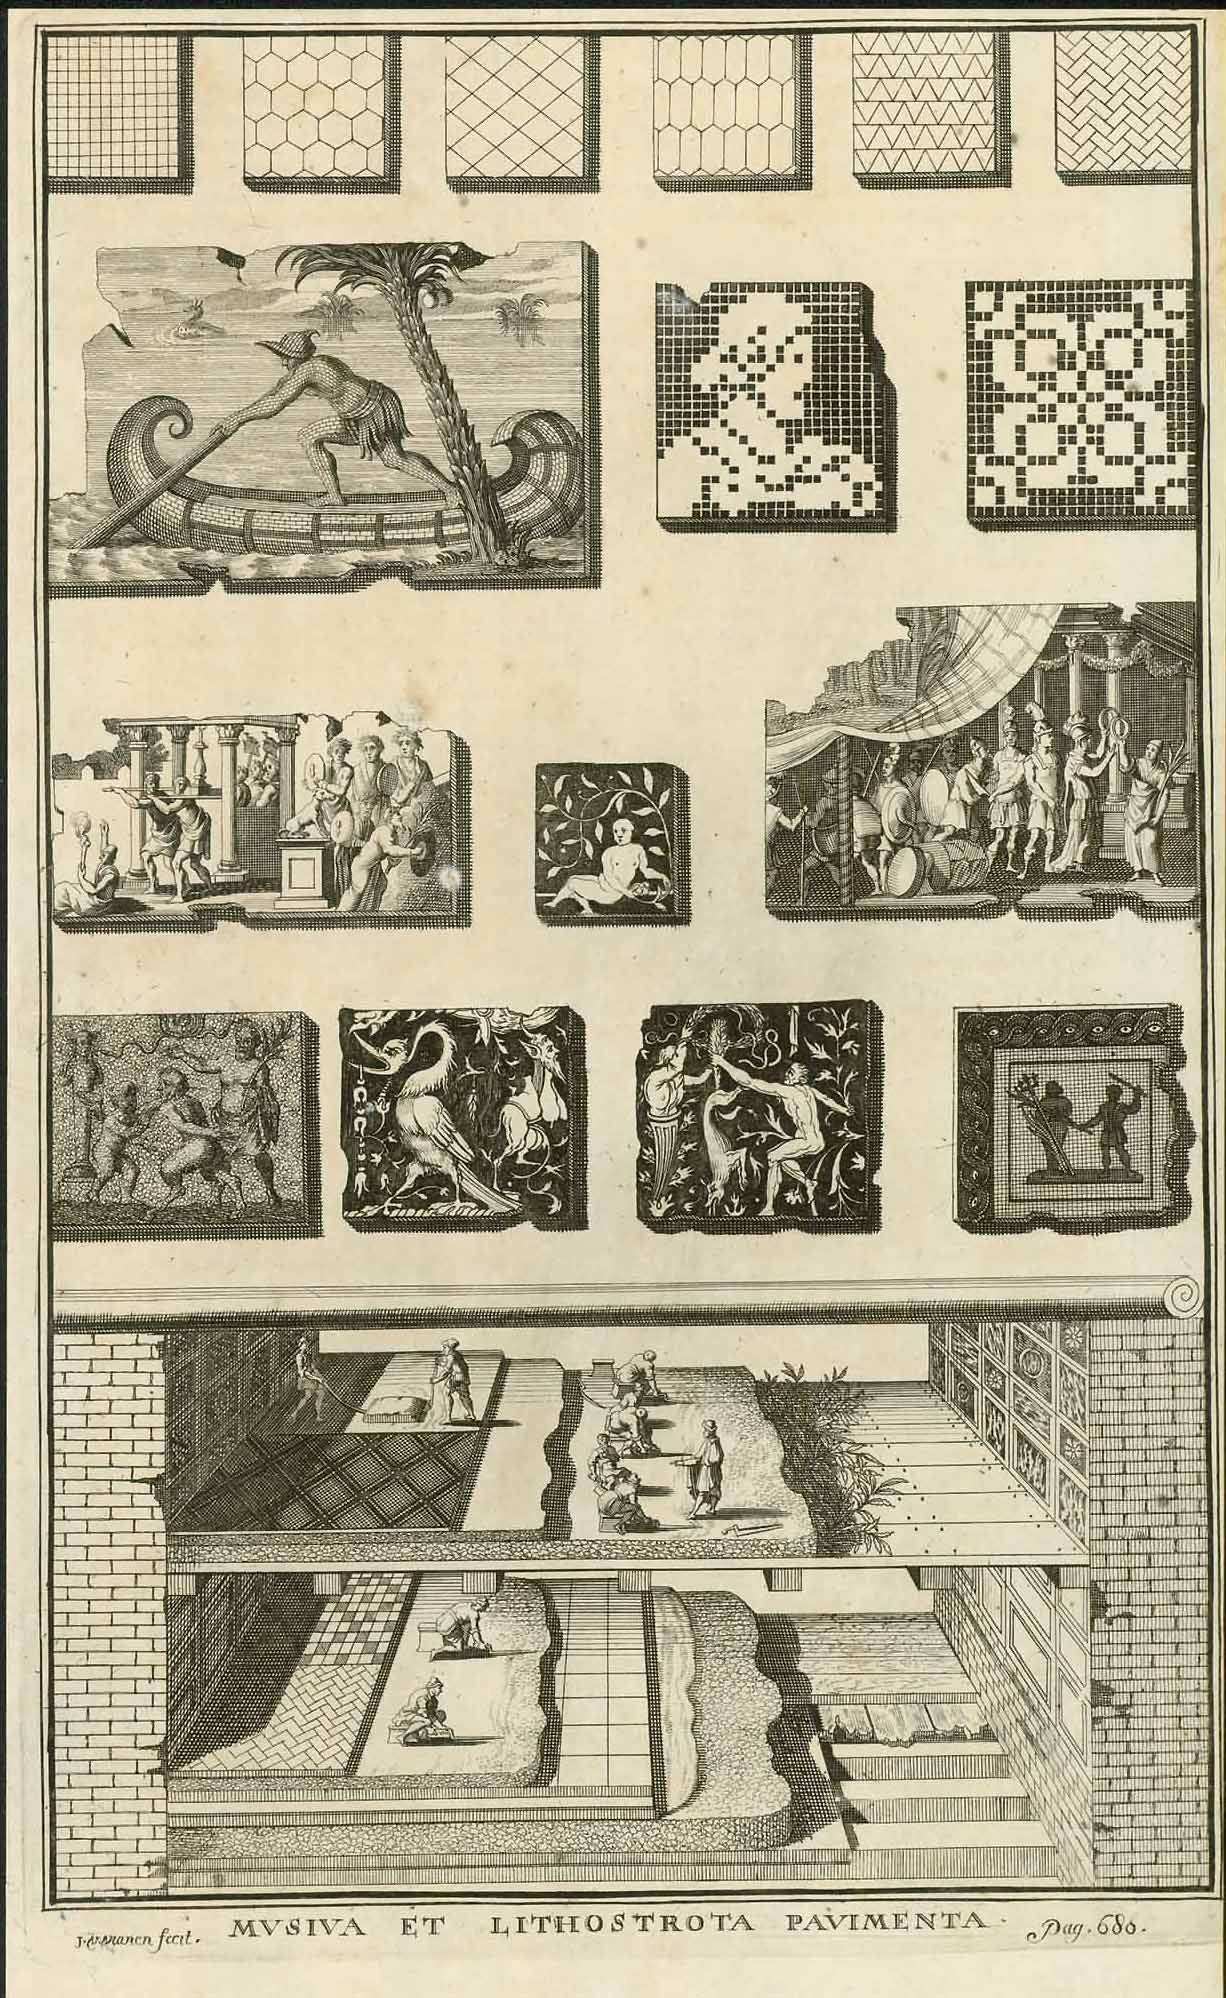 No title. Mosaic (wall or pavement)  Copper etching.  Published in Thesaurus Graecarum antiquitatum, in quo continentur effigies virorum ac foeminarum illustrium ... , adjecta brevi descriptione singulorum ..., Bde. 1&endash;3, Leiden 1697&endash;1698.  Thesaurus Graecarum antiquitatum, continens libros erudite & operose per varias aetates scriptos .... Bde. 4&endash;12/2, Leiden 1699&endash;1702.  By Jakob Gronovius (1645-1716)  Well preserved with only negligent traces of age and use. Wide margins  30,8 x